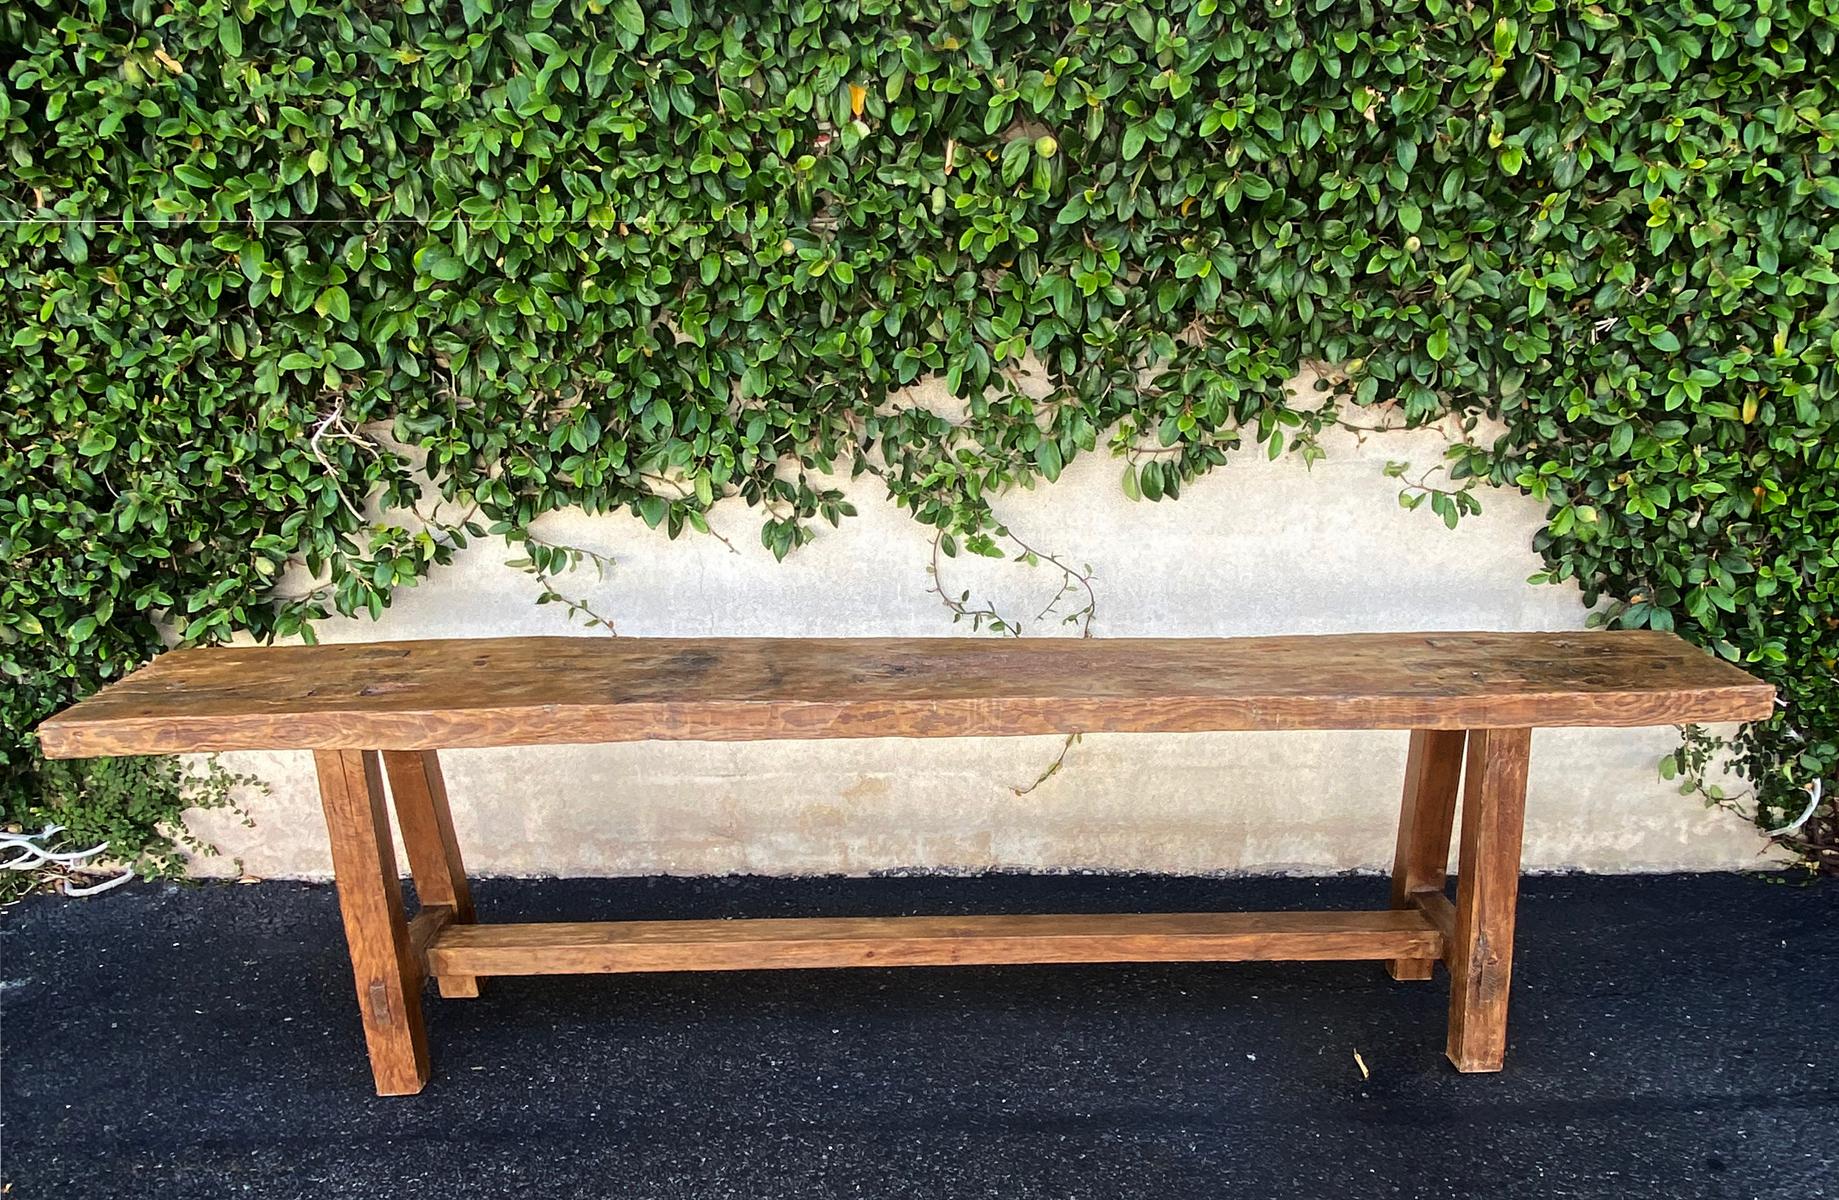 Handsome early 20th c Guatemalan Cypress wood carpenter's bench with signs of use and wear, giving it a nice patina. Looks like it was also used as an altar table considering the old burn marks, which is typical of old Guatemalan pieces.
This piece